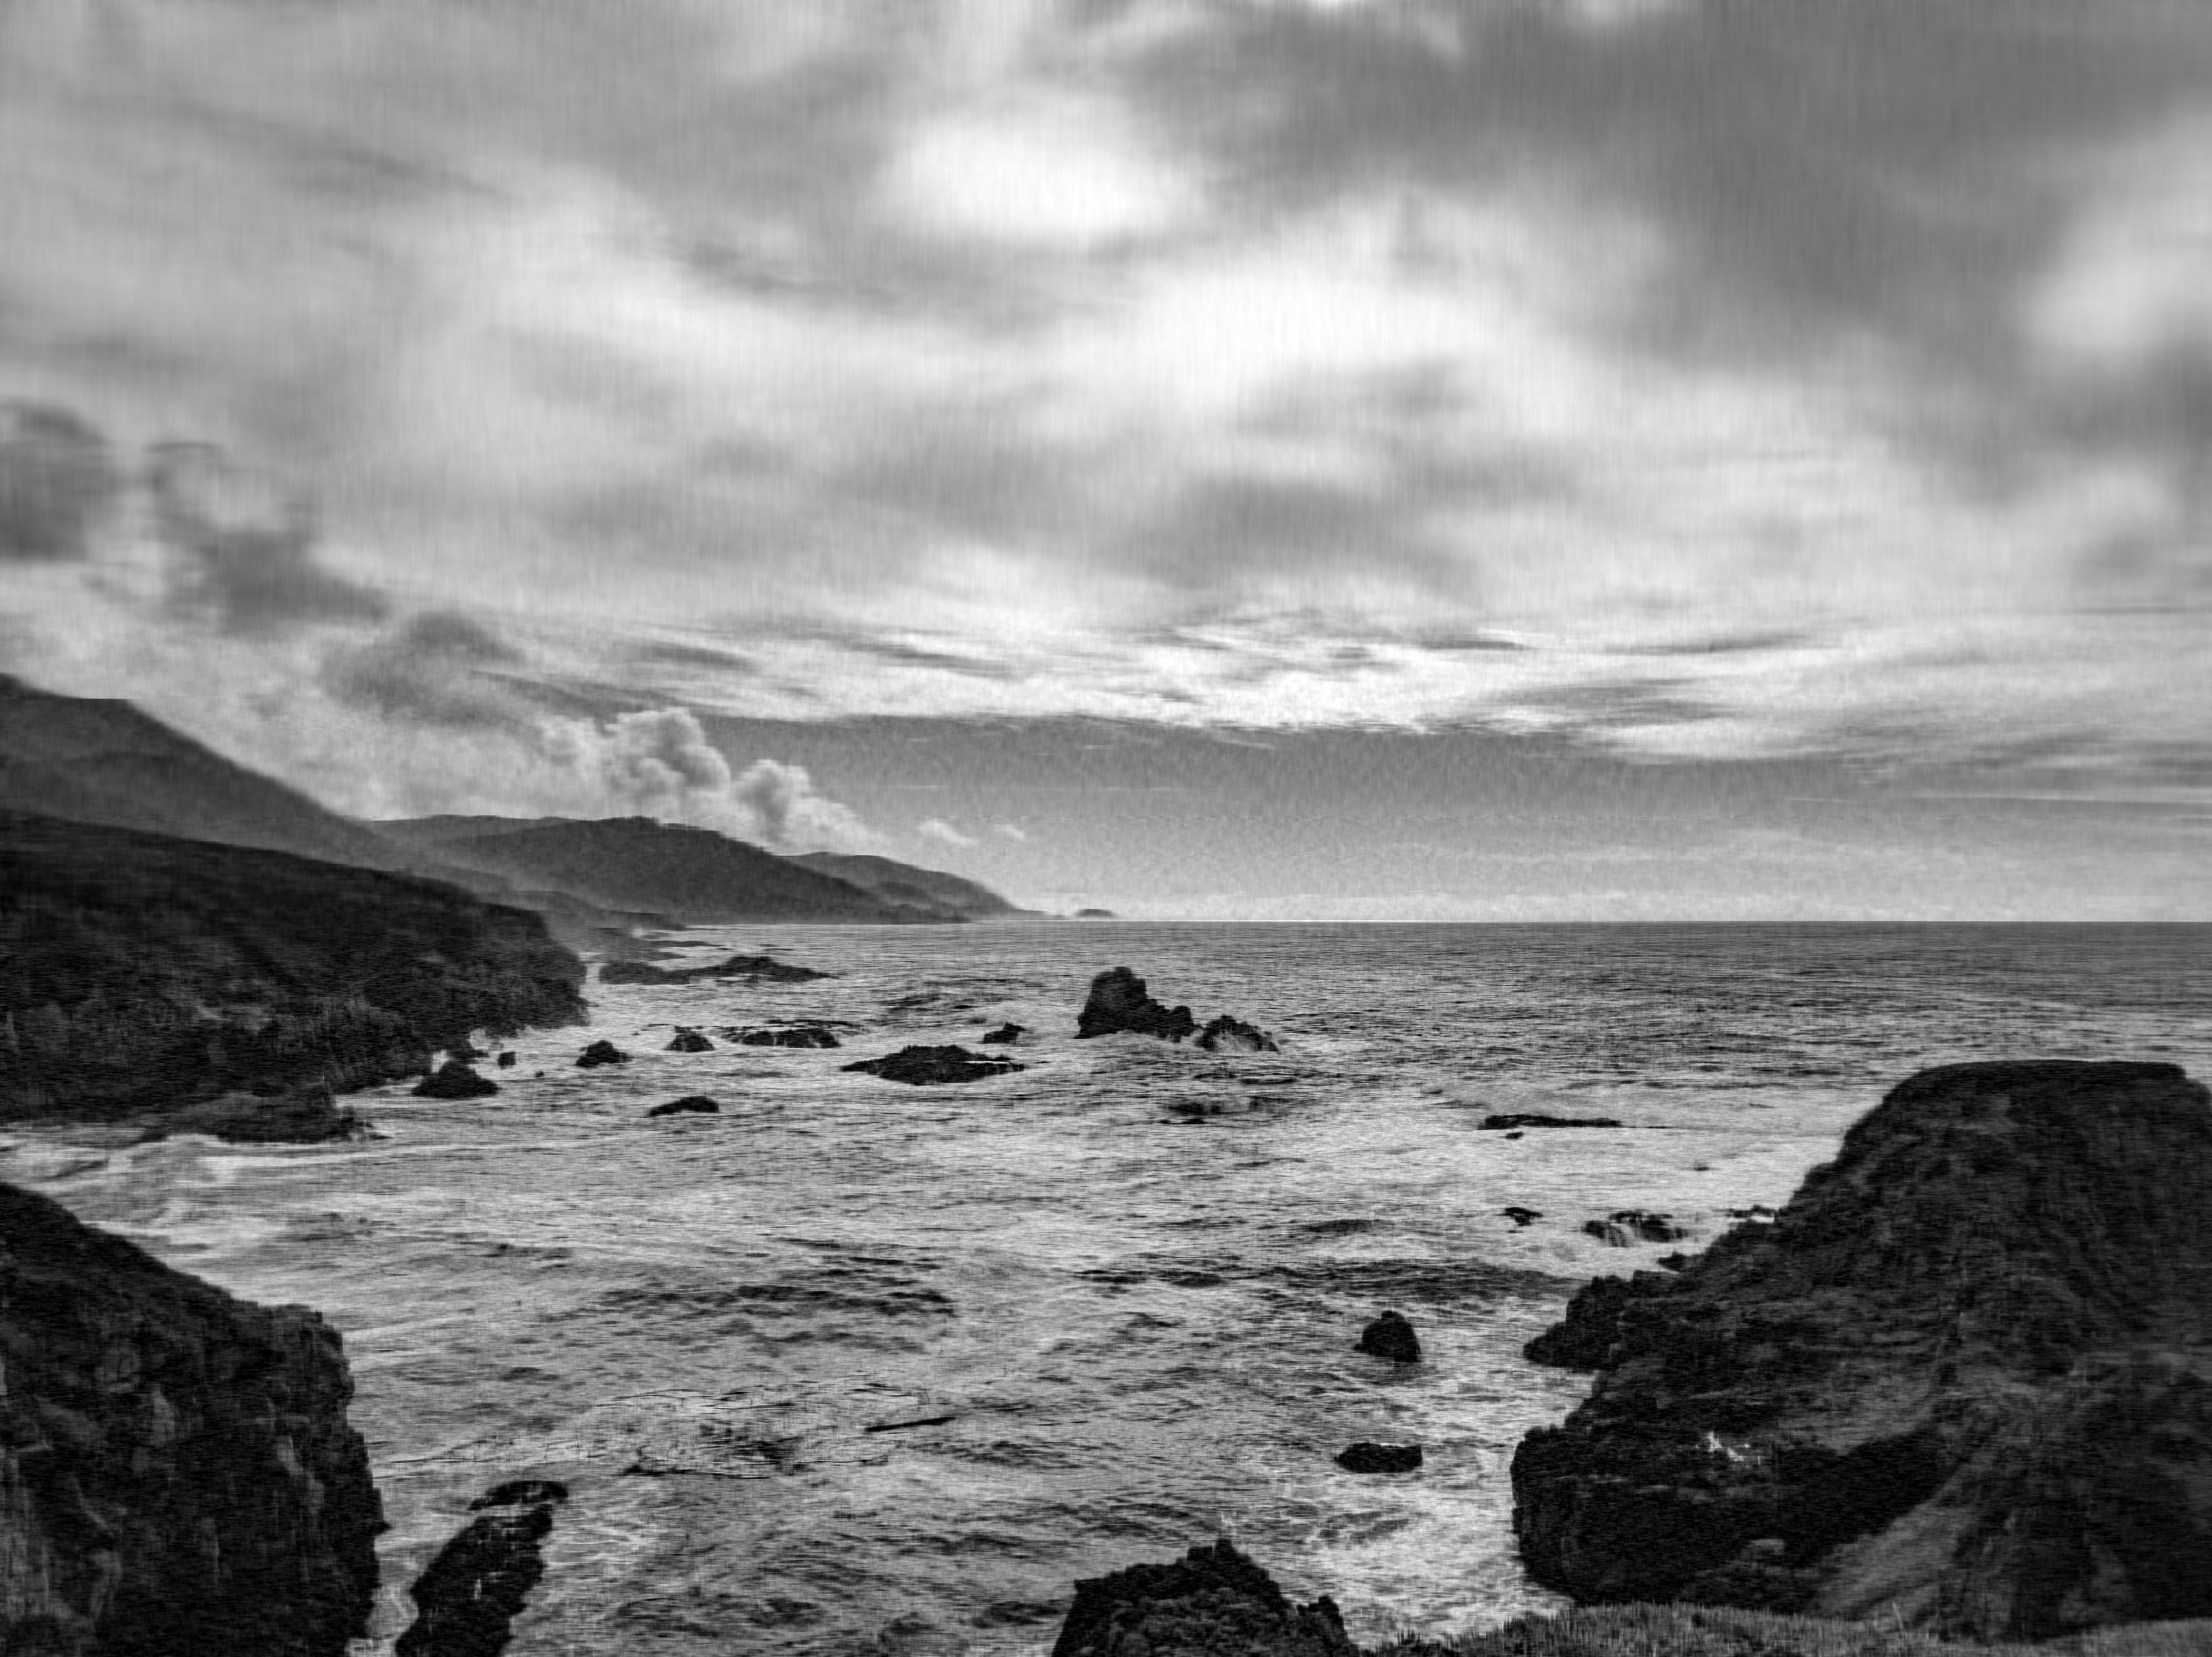 Big Sur photo compressed with deterministic SVD